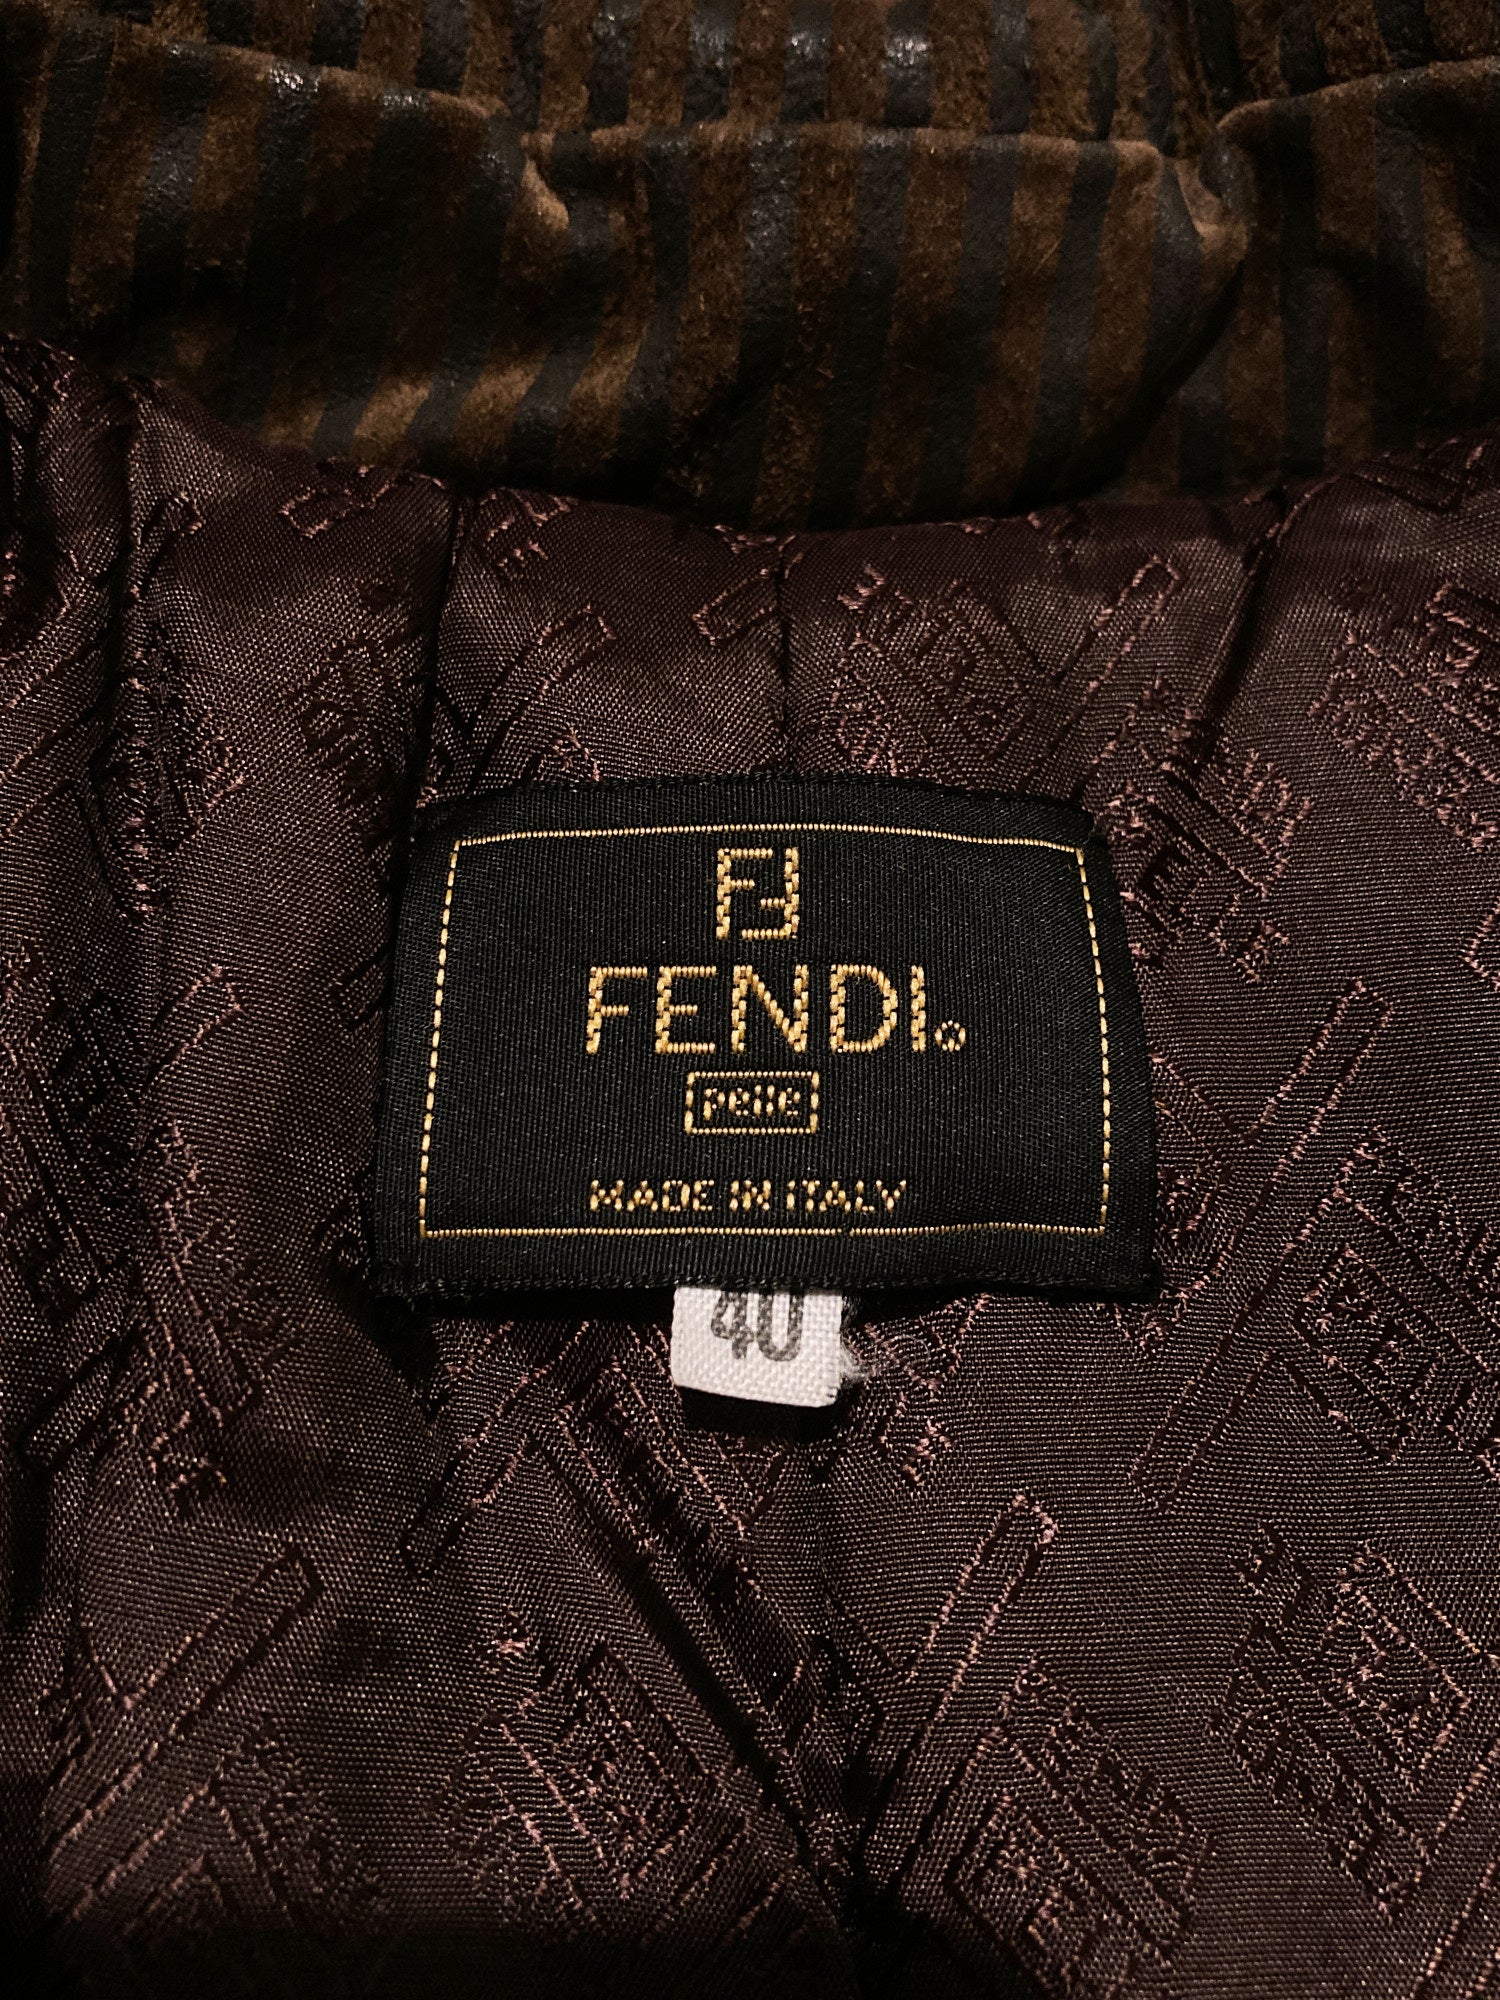 Fendi Pelle 1990s striped brown suede leather padded coat - size 40